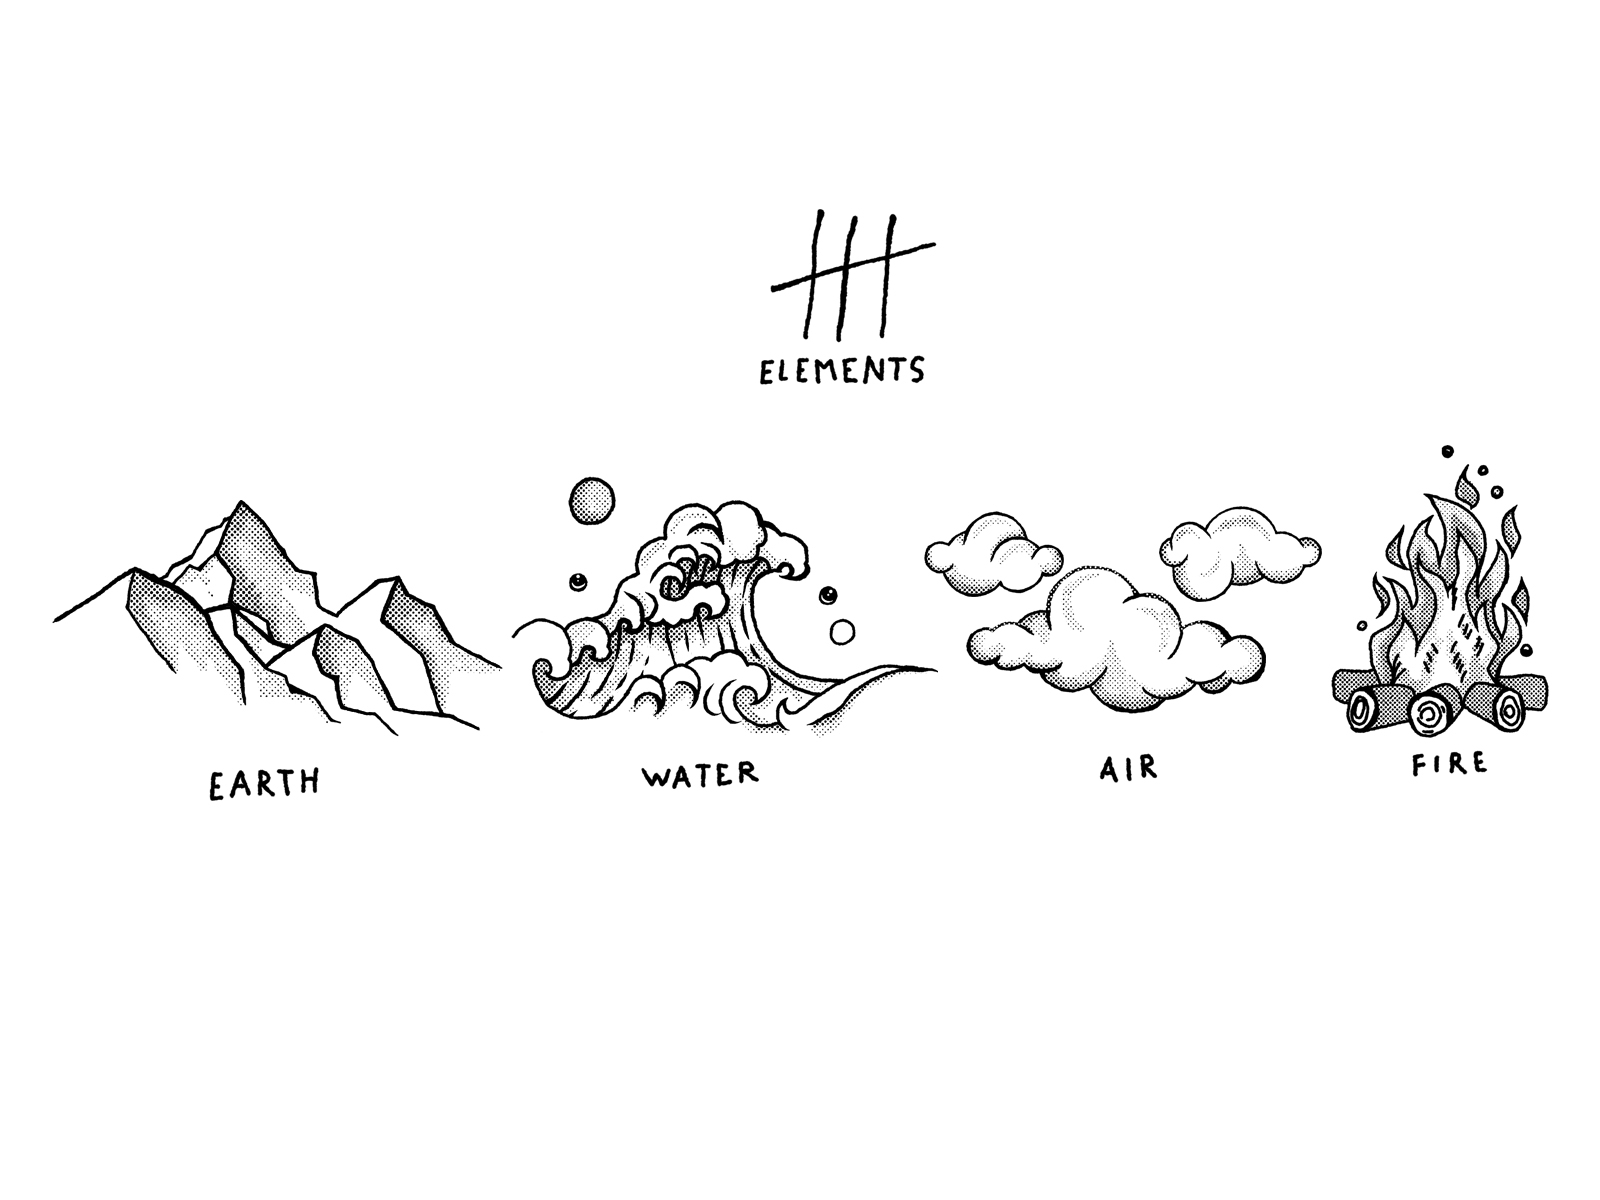 4 elements drawing